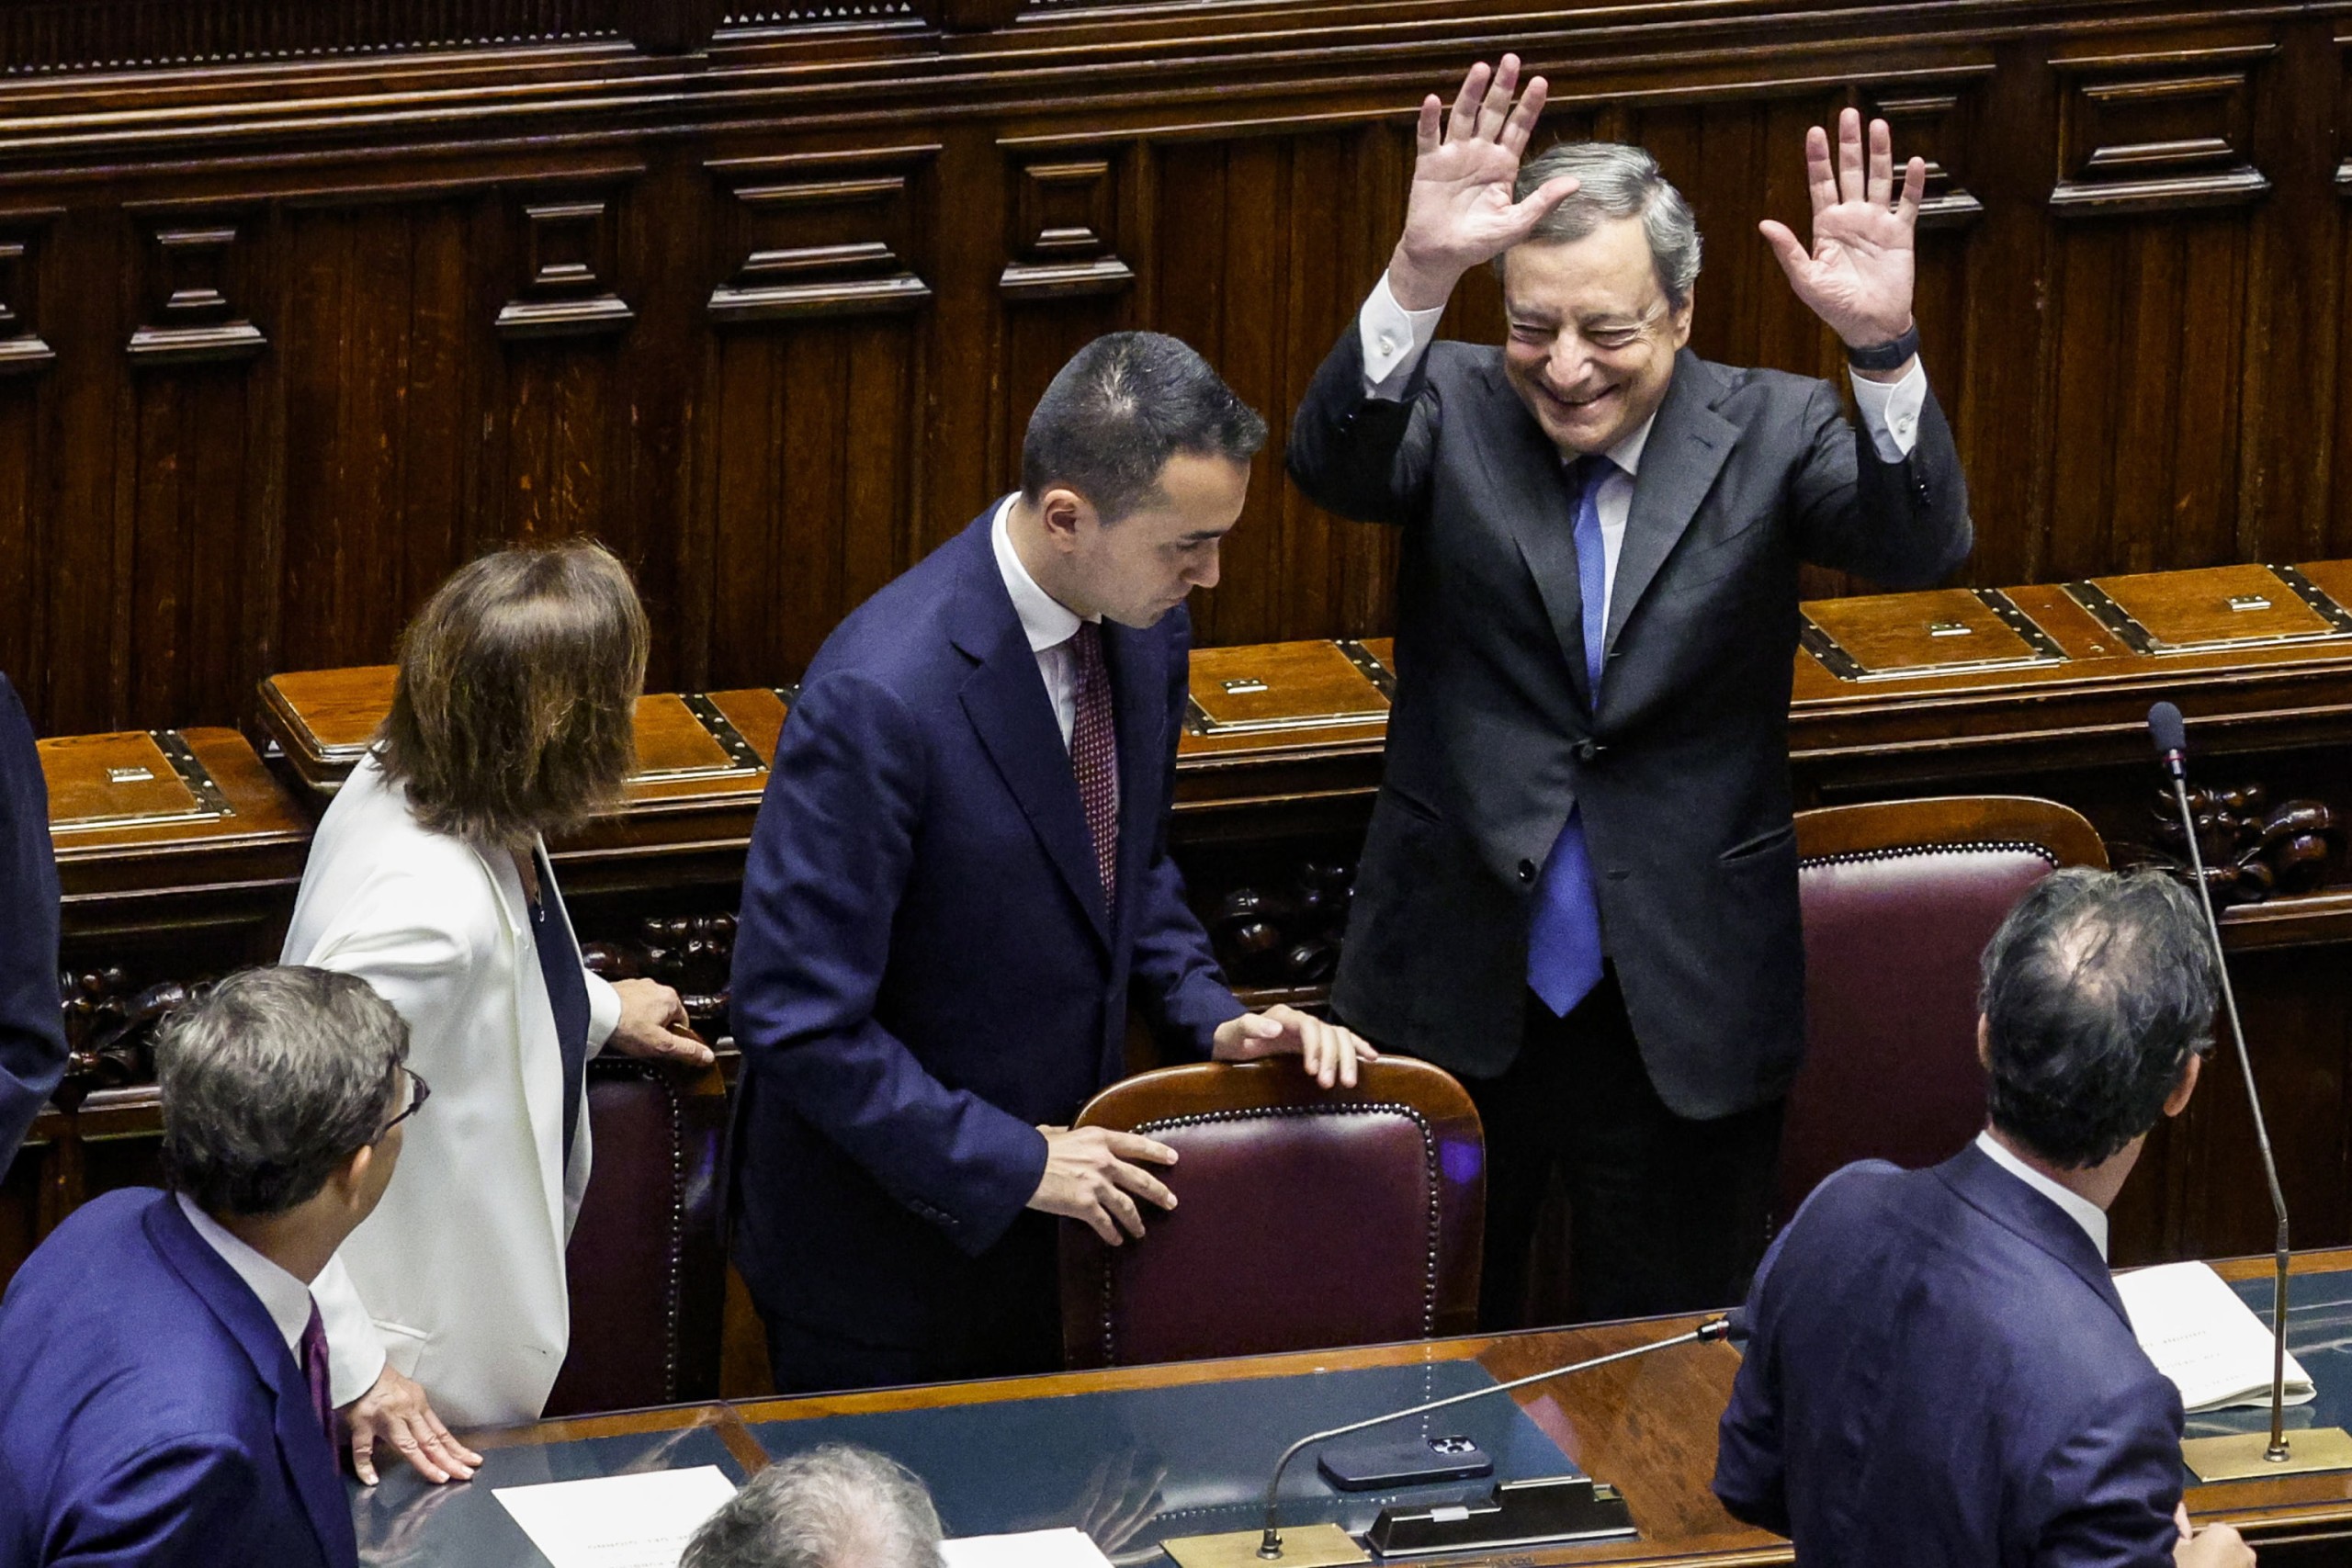 epa10083571 Italian Prime Minister Mario Draghi (R) receives applause prior his speech at the Italian Lower House in Rome, Italy, 21 July 2022. The Prime Minister announced in the House chamber at the beginning of the general debate his intention to go to the Quirinal Palace to resign. The previous day, three parties in Draghi's ruling coalition failed to take part in a confidence vote in the Senate on a resolution backing Premier Draghi. The previous week, Italian President Mattarella refused to accept Draghi's resignations following the failure of ruling coalition partner M5S to back the government in a confidence vote.  EPA/FABIO FRUSTACI